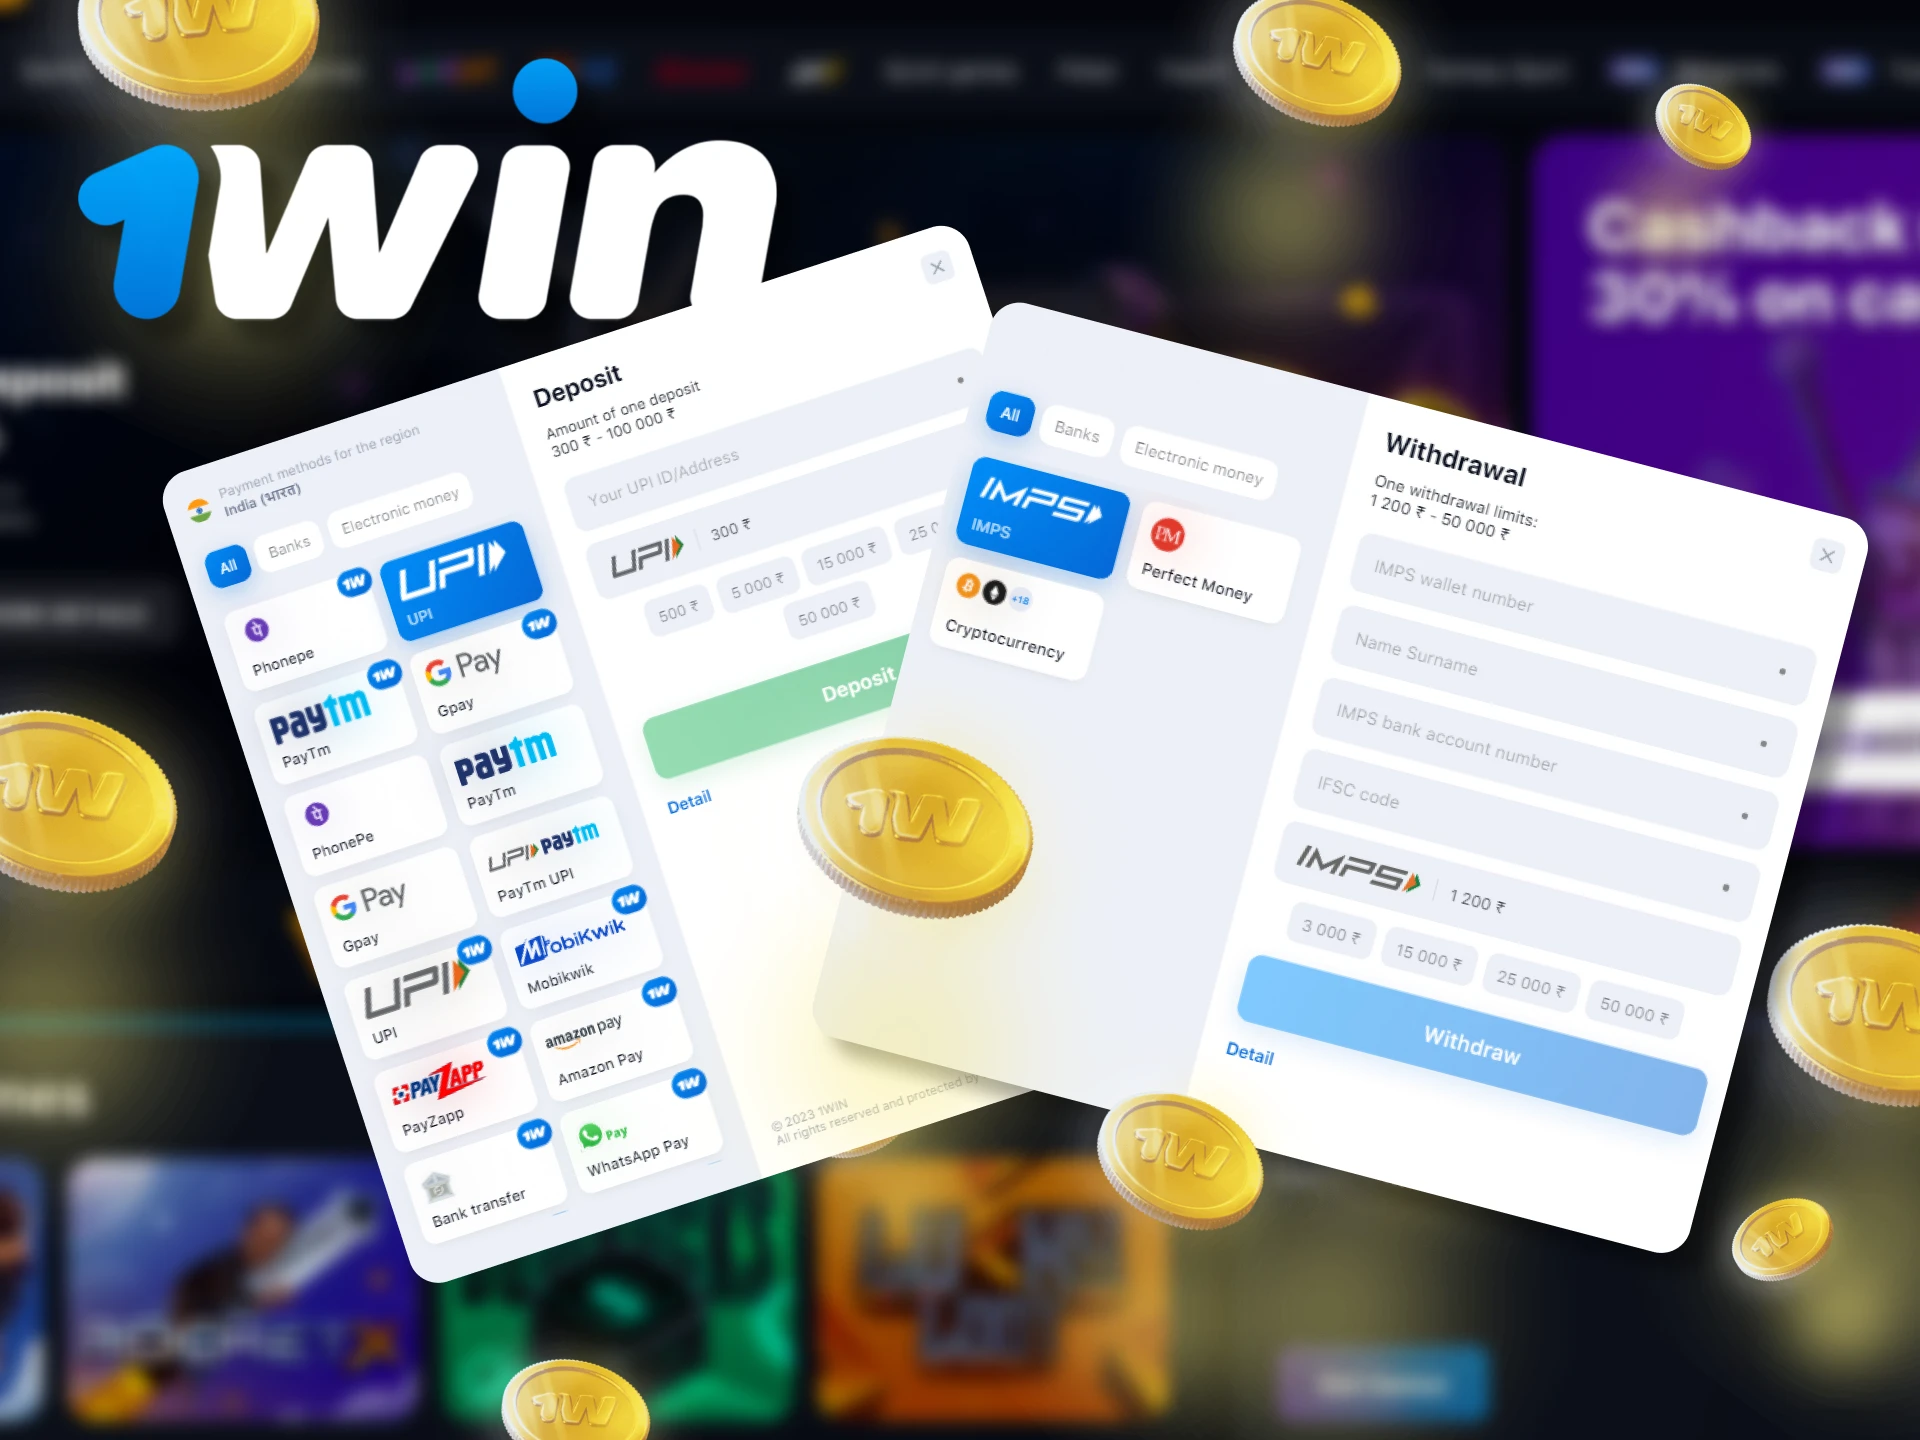 At 1Win it's easy to deposit to bet on fantasy sports and withdraw winnings.